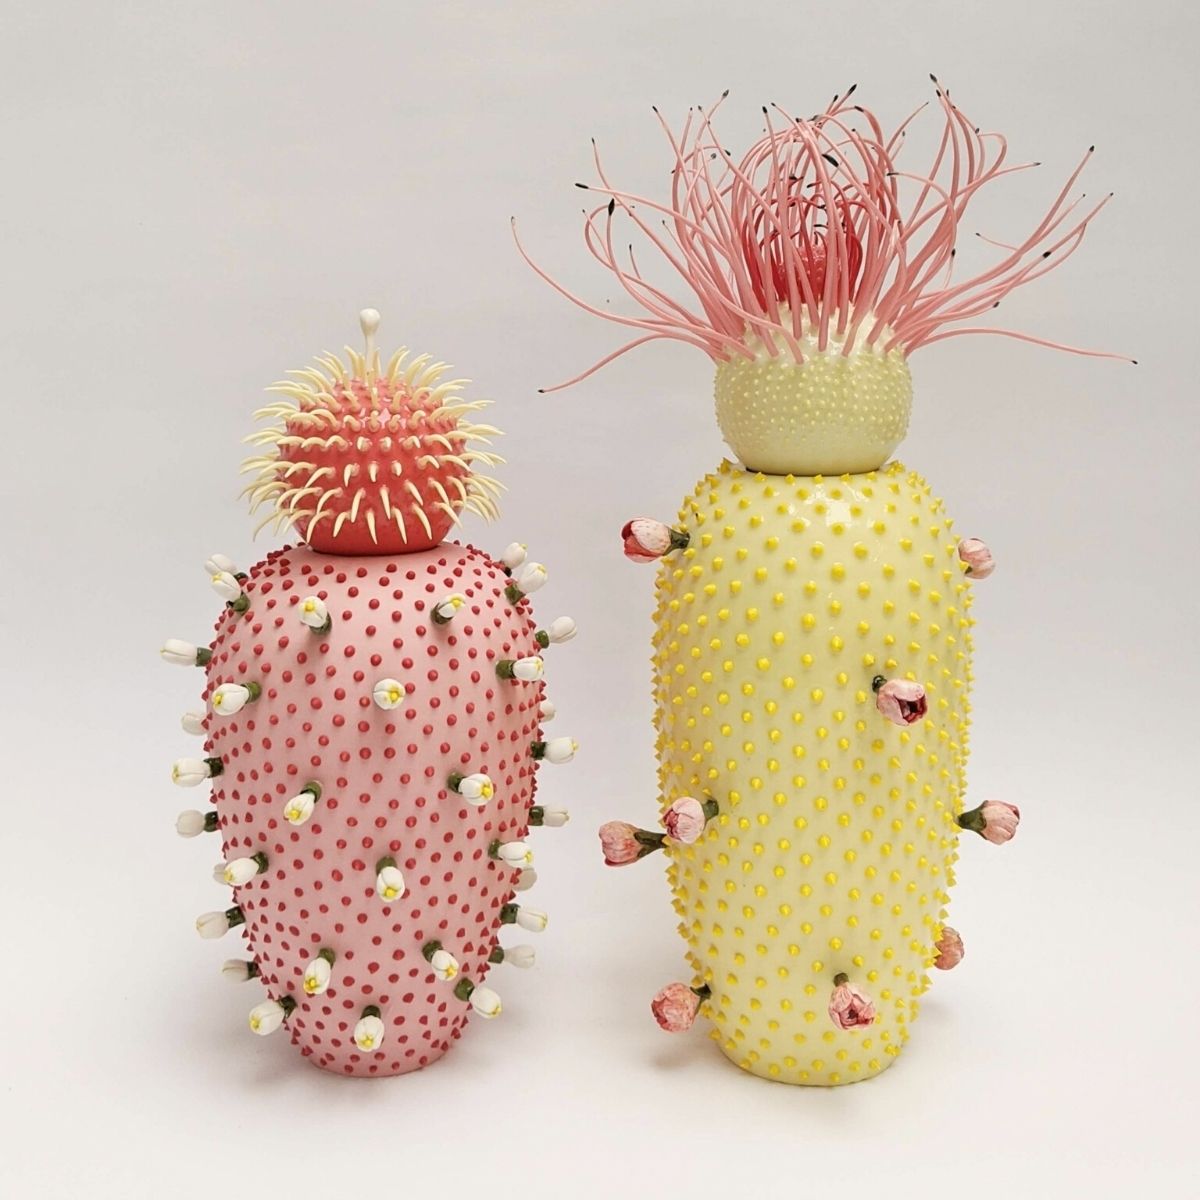 Delicate spikes and petals bloom in porcelain pieces by Avital Avital featured on Thursd